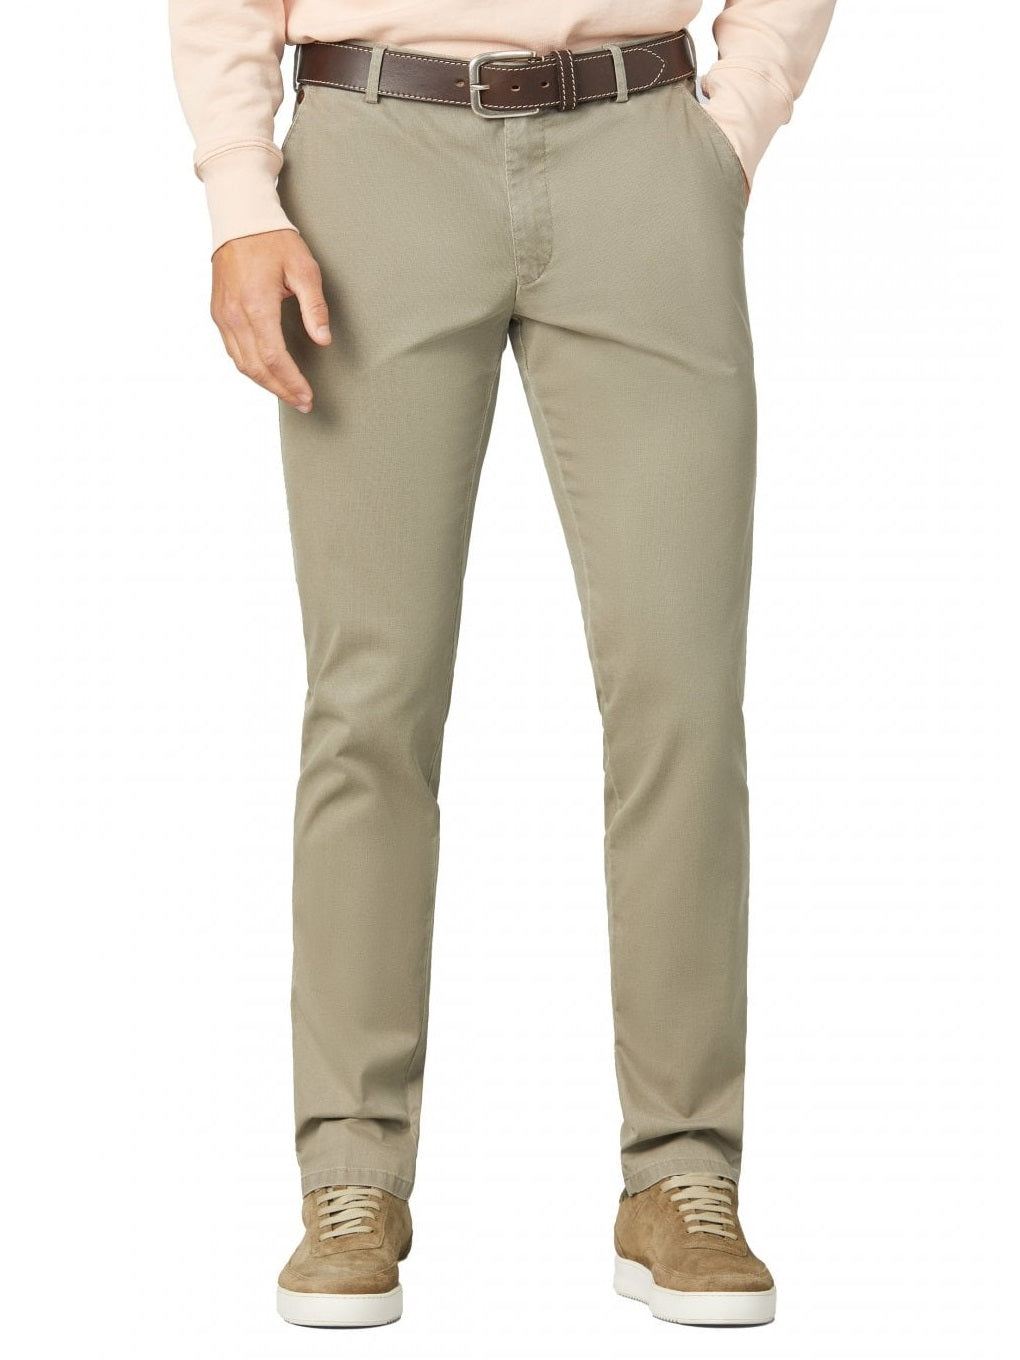 50% OFF - MEYER Trousers - New York Summer Cotelé Chinos - Taupe